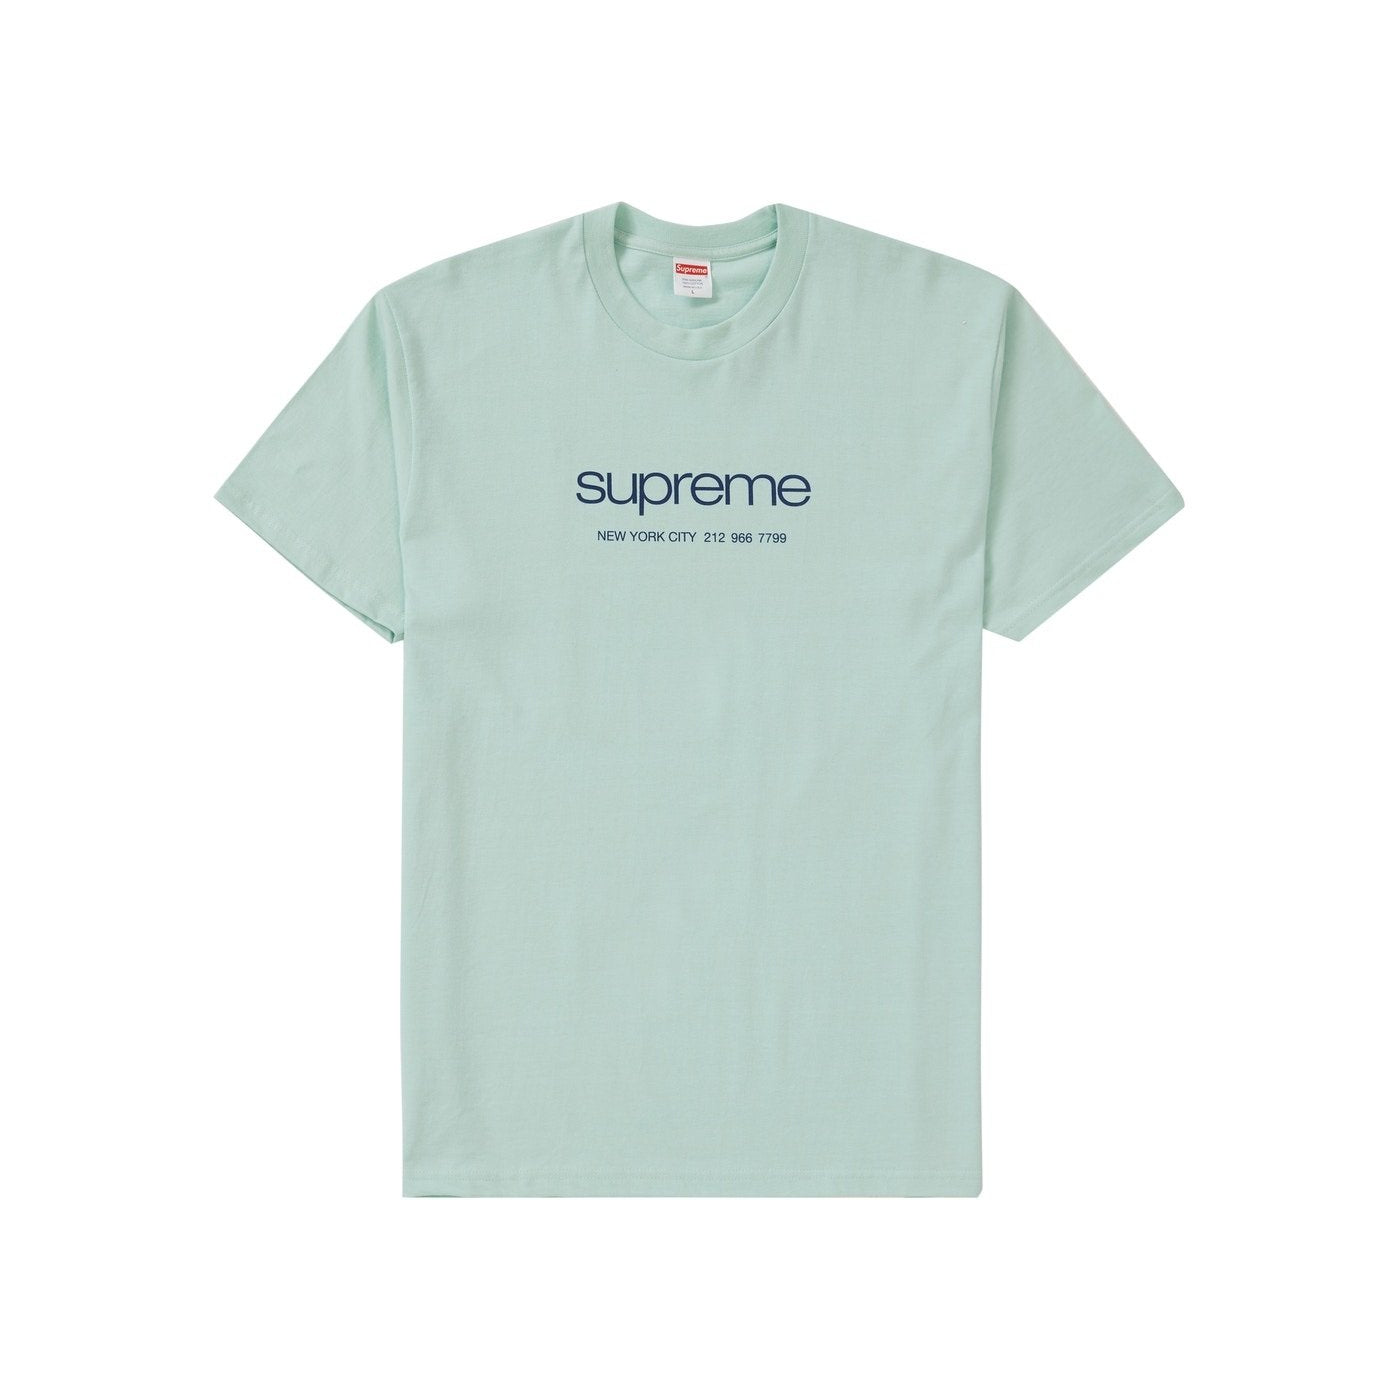 Supreme Shop Tee Light Teal SS20 - Centrall Online